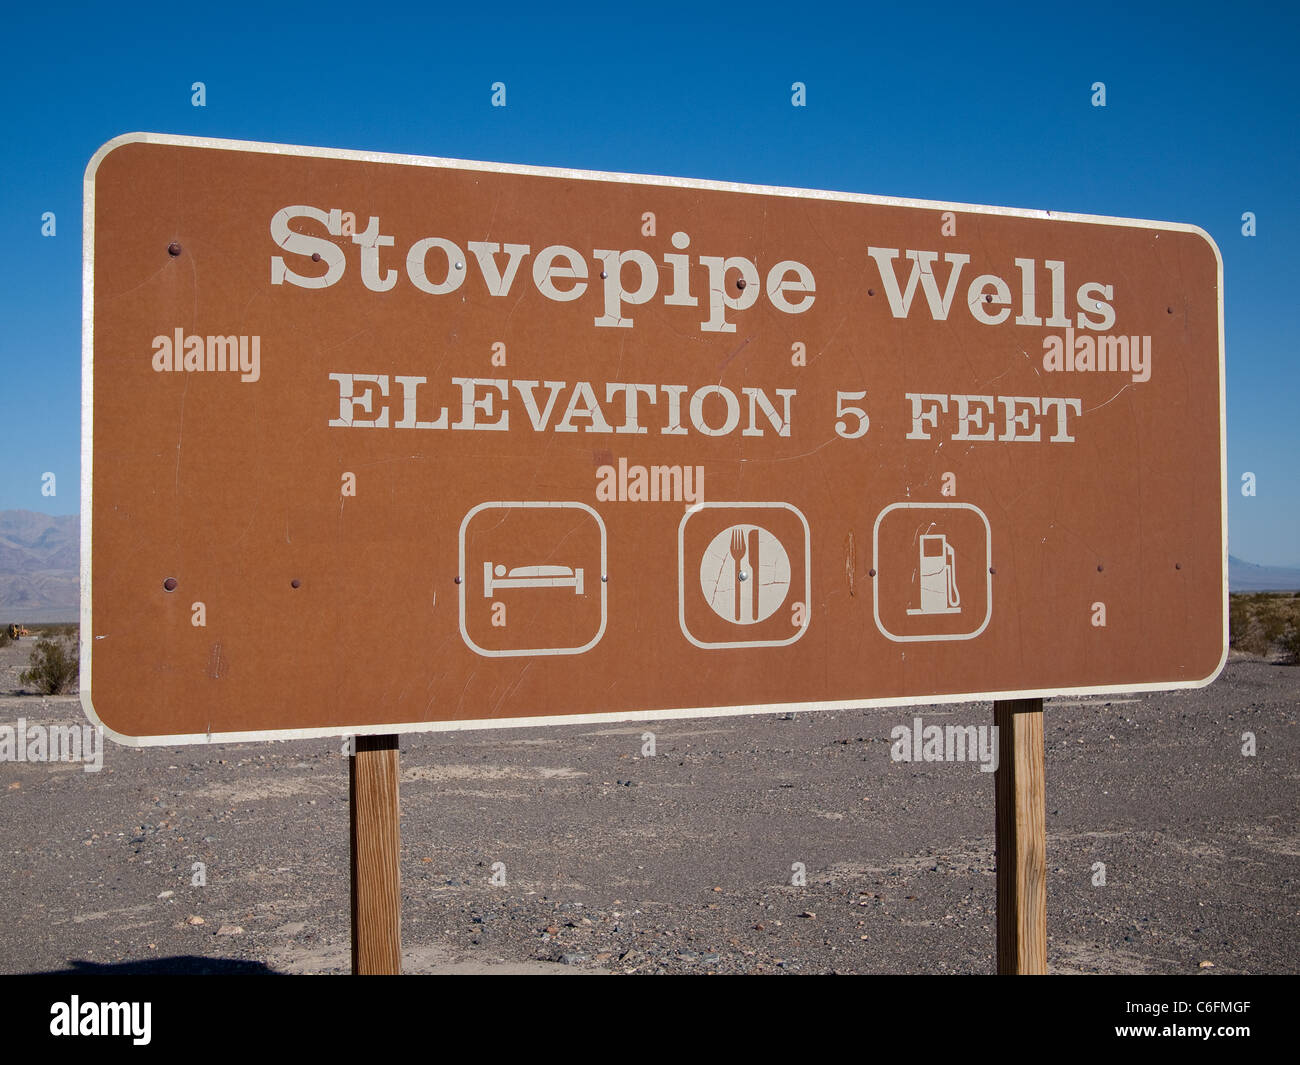 Stovepipe Wells Signe, Death Valley, Californie Banque D'Images